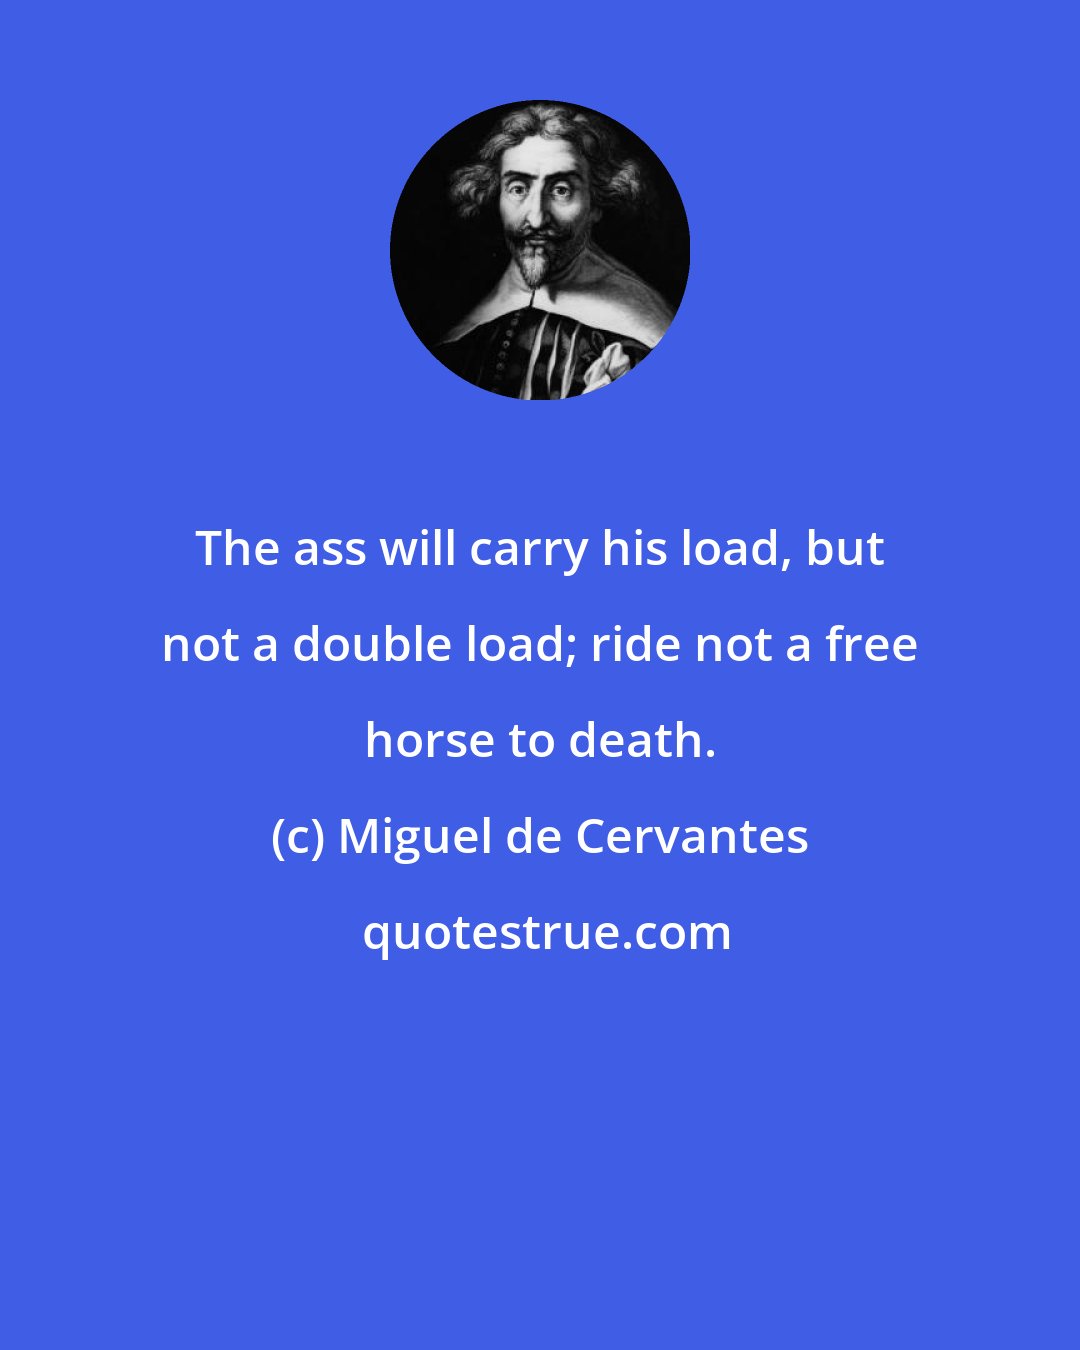 Miguel de Cervantes: The ass will carry his load, but not a double load; ride not a free horse to death.